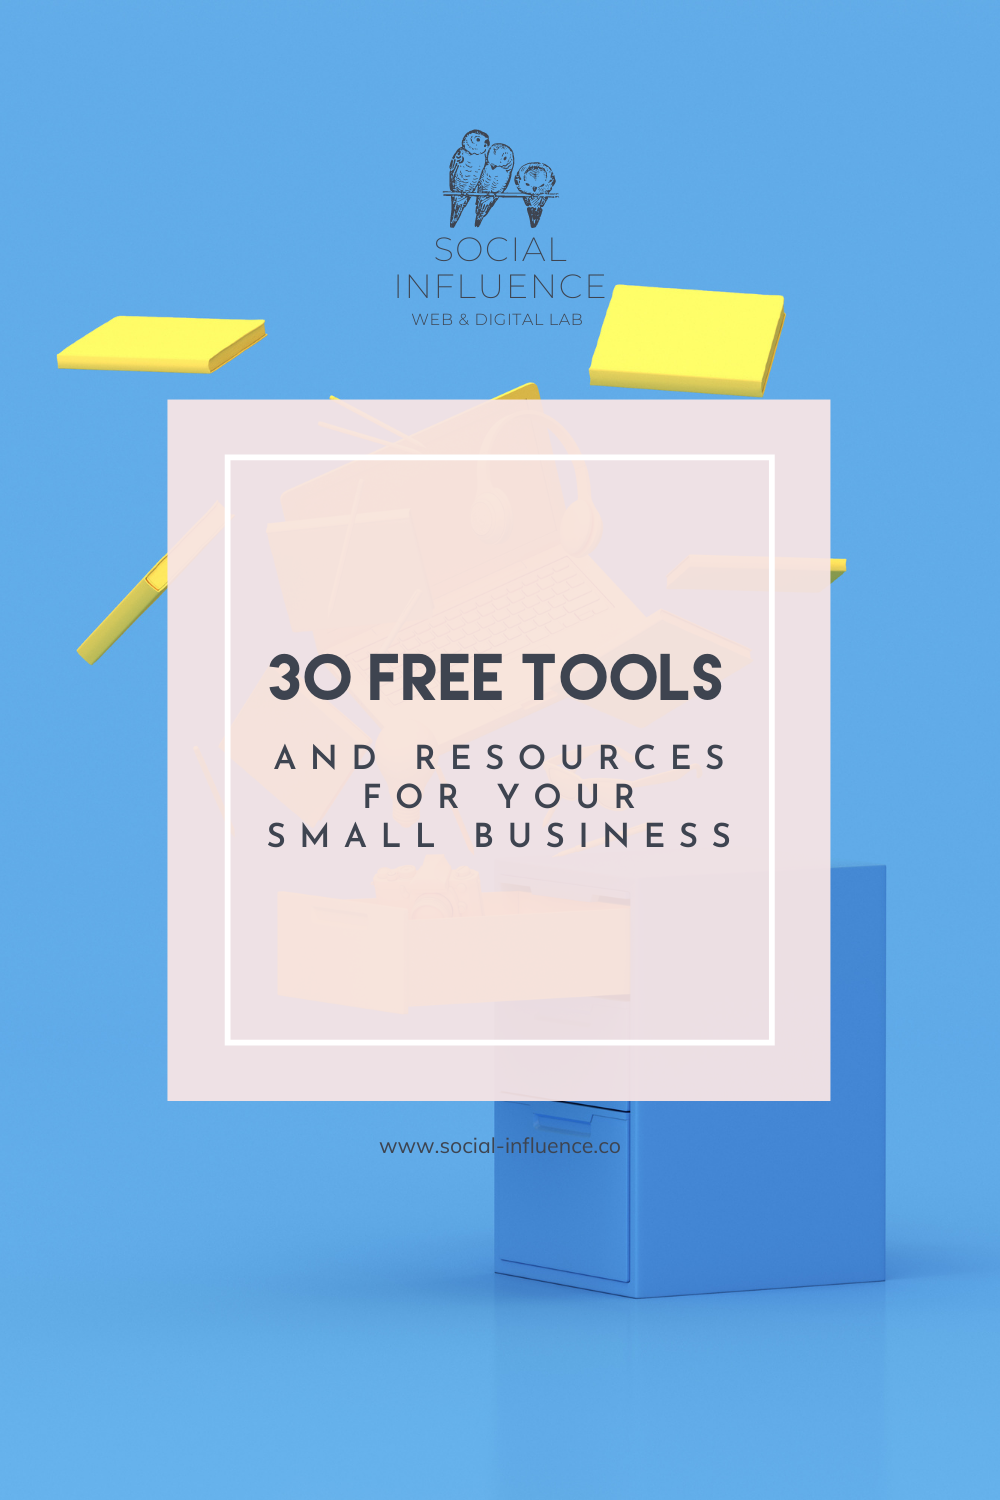 30 Free Tools and Resources for Your Small Business written on a pastel blue background with social influence logo